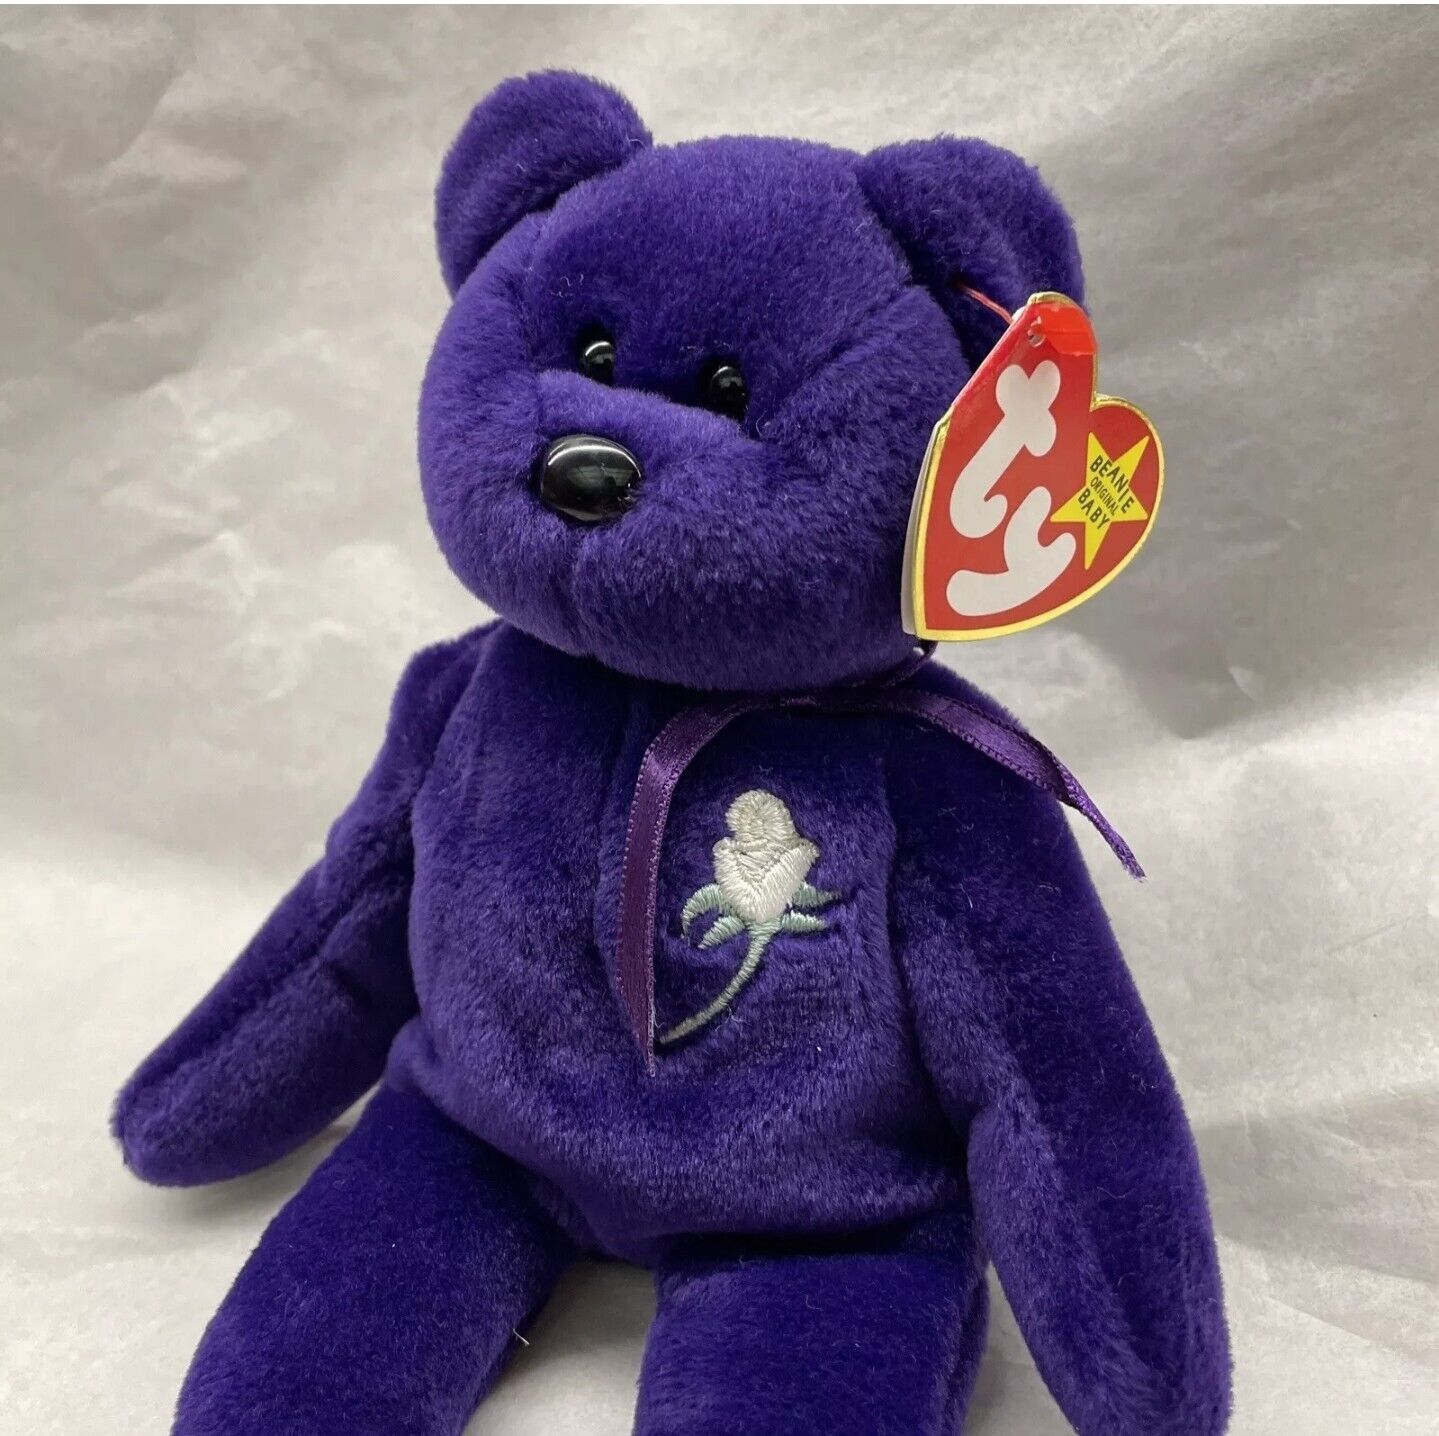 1997 Princess Diana Beanie Baby 1st Edition RAREST MINT CONDITION I Must HAVE 